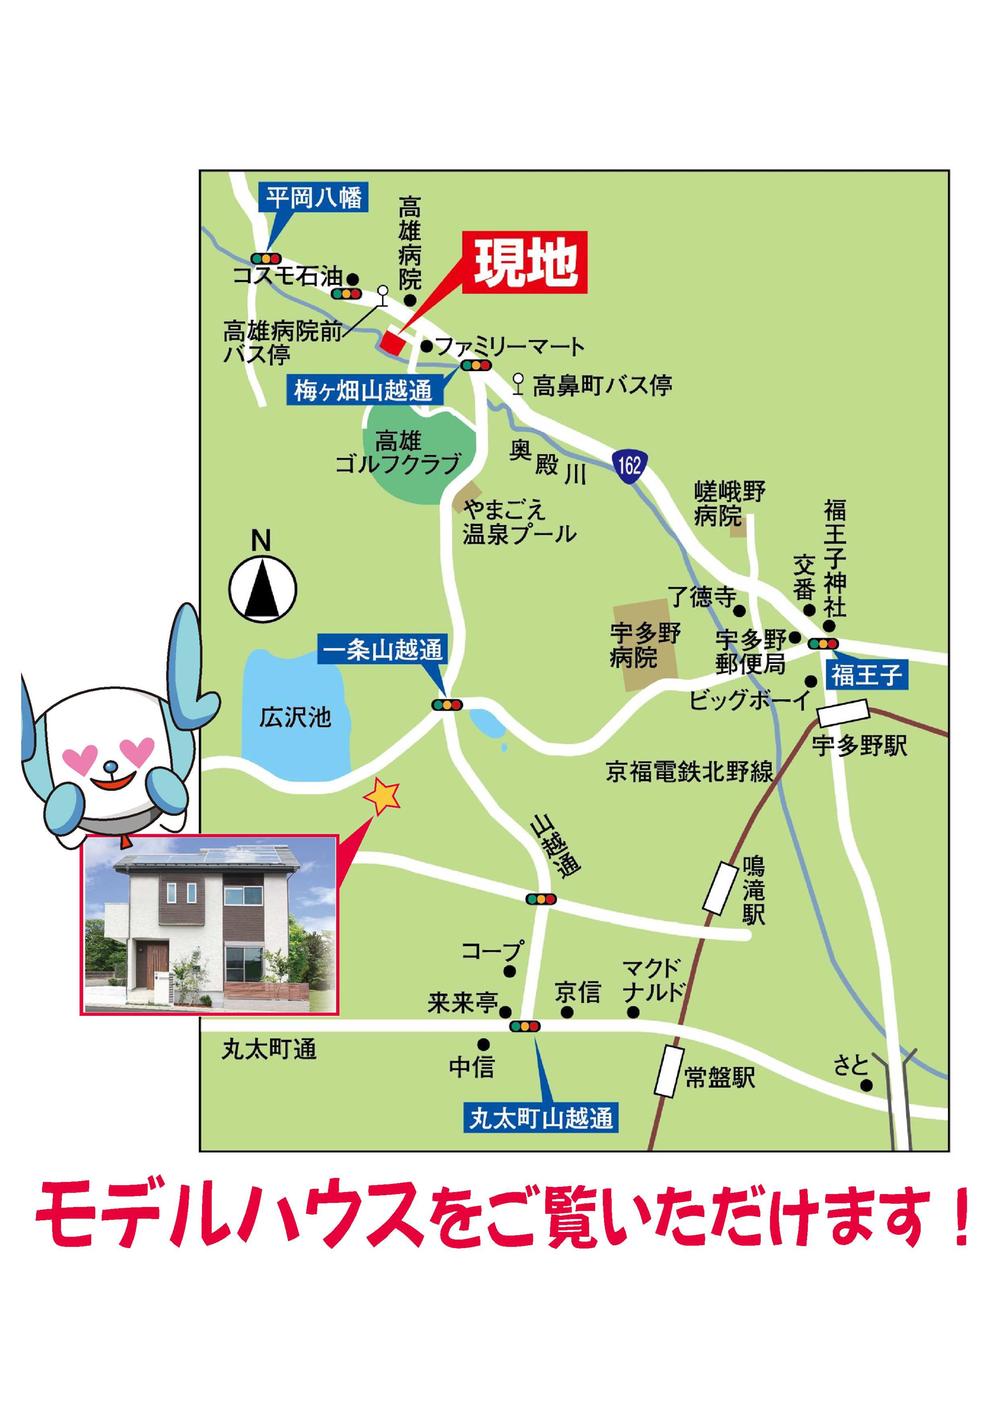 Local guide map. Model house of our construction is, It will guide you to Sagahirosawa